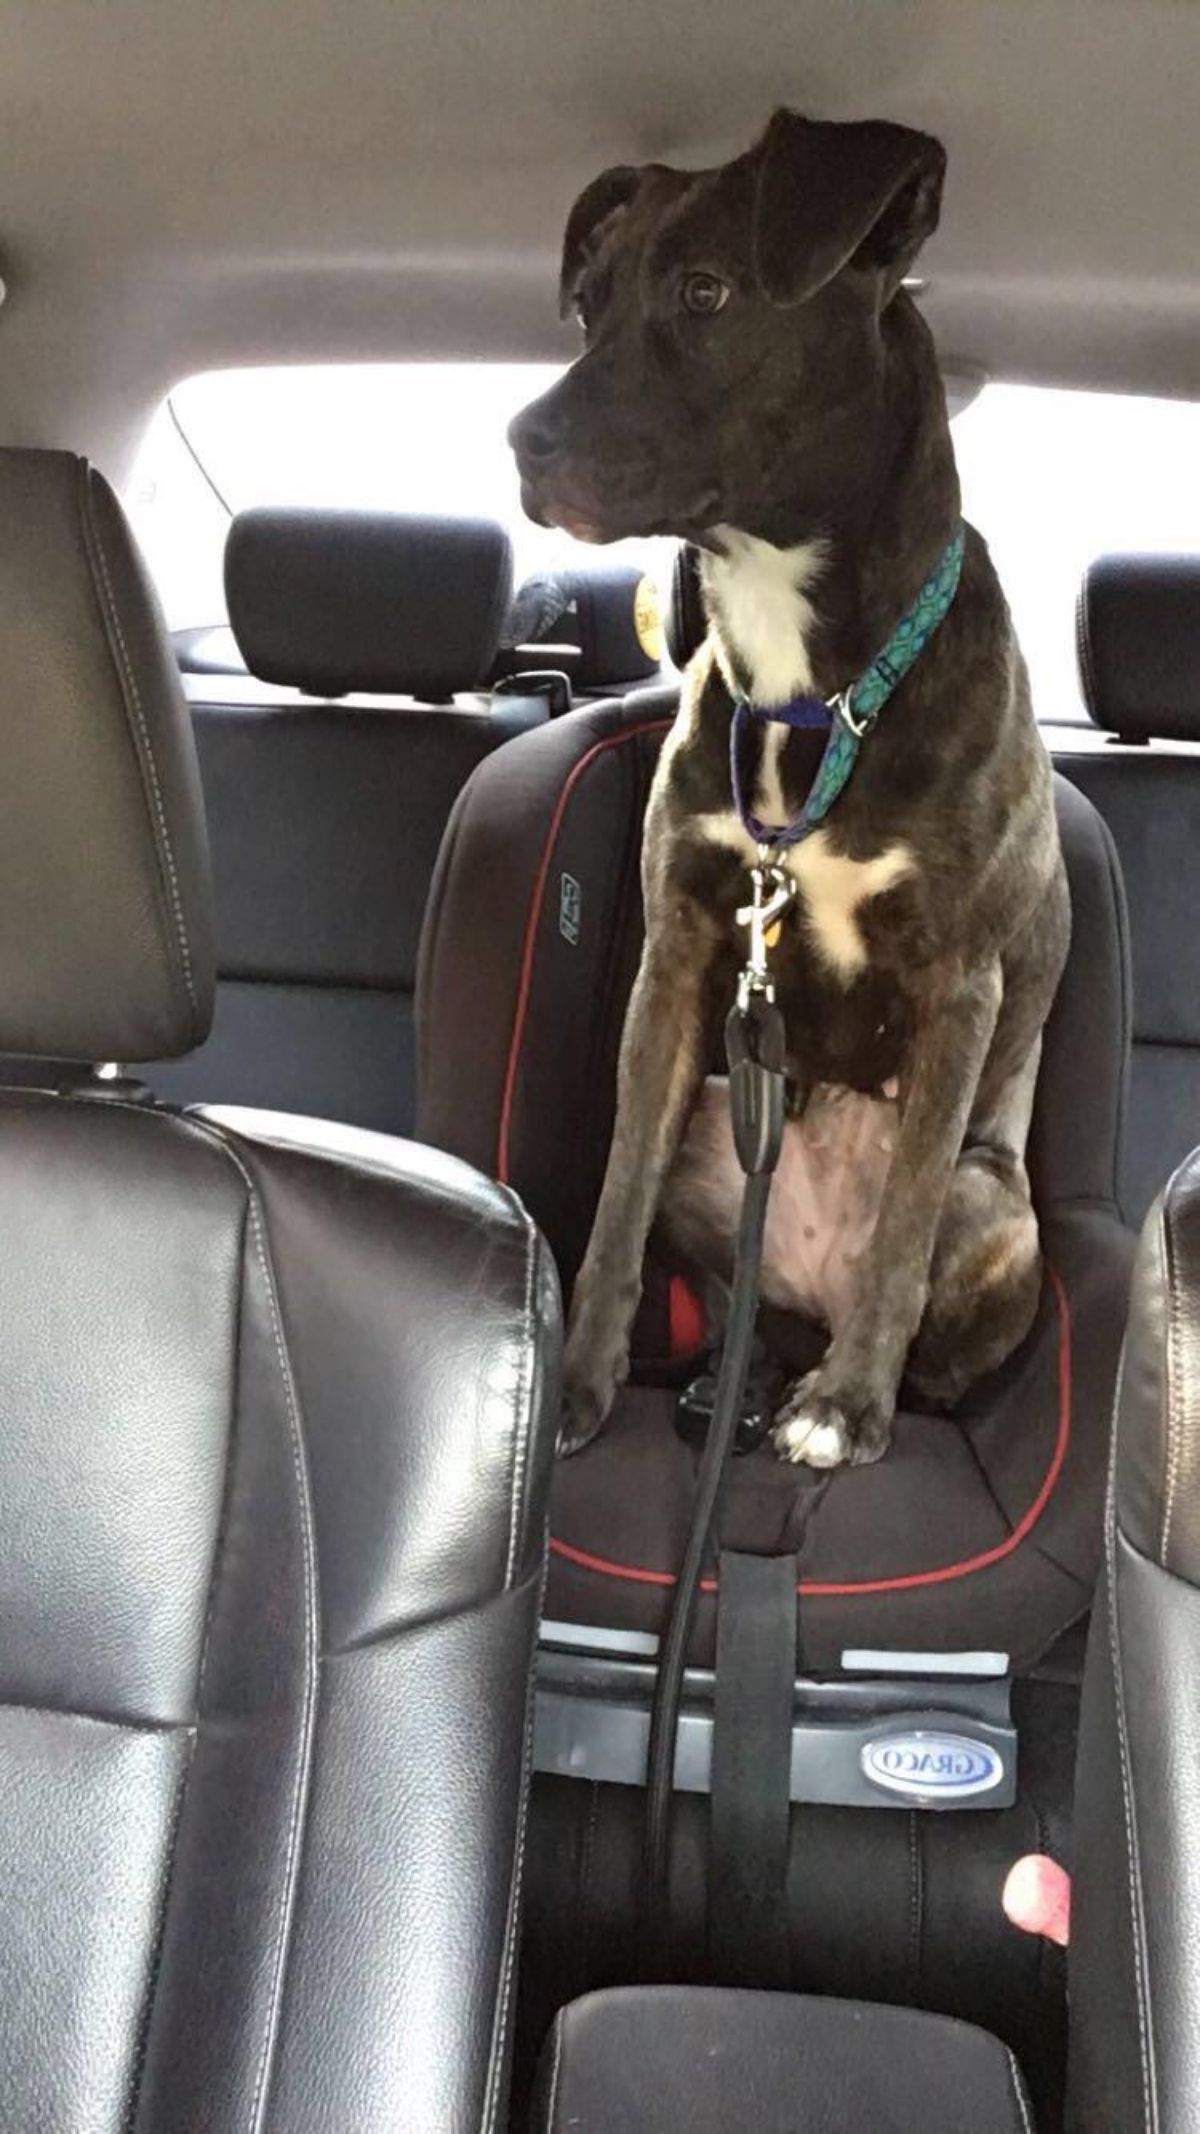 black and white dog sitting in a black child's car seat